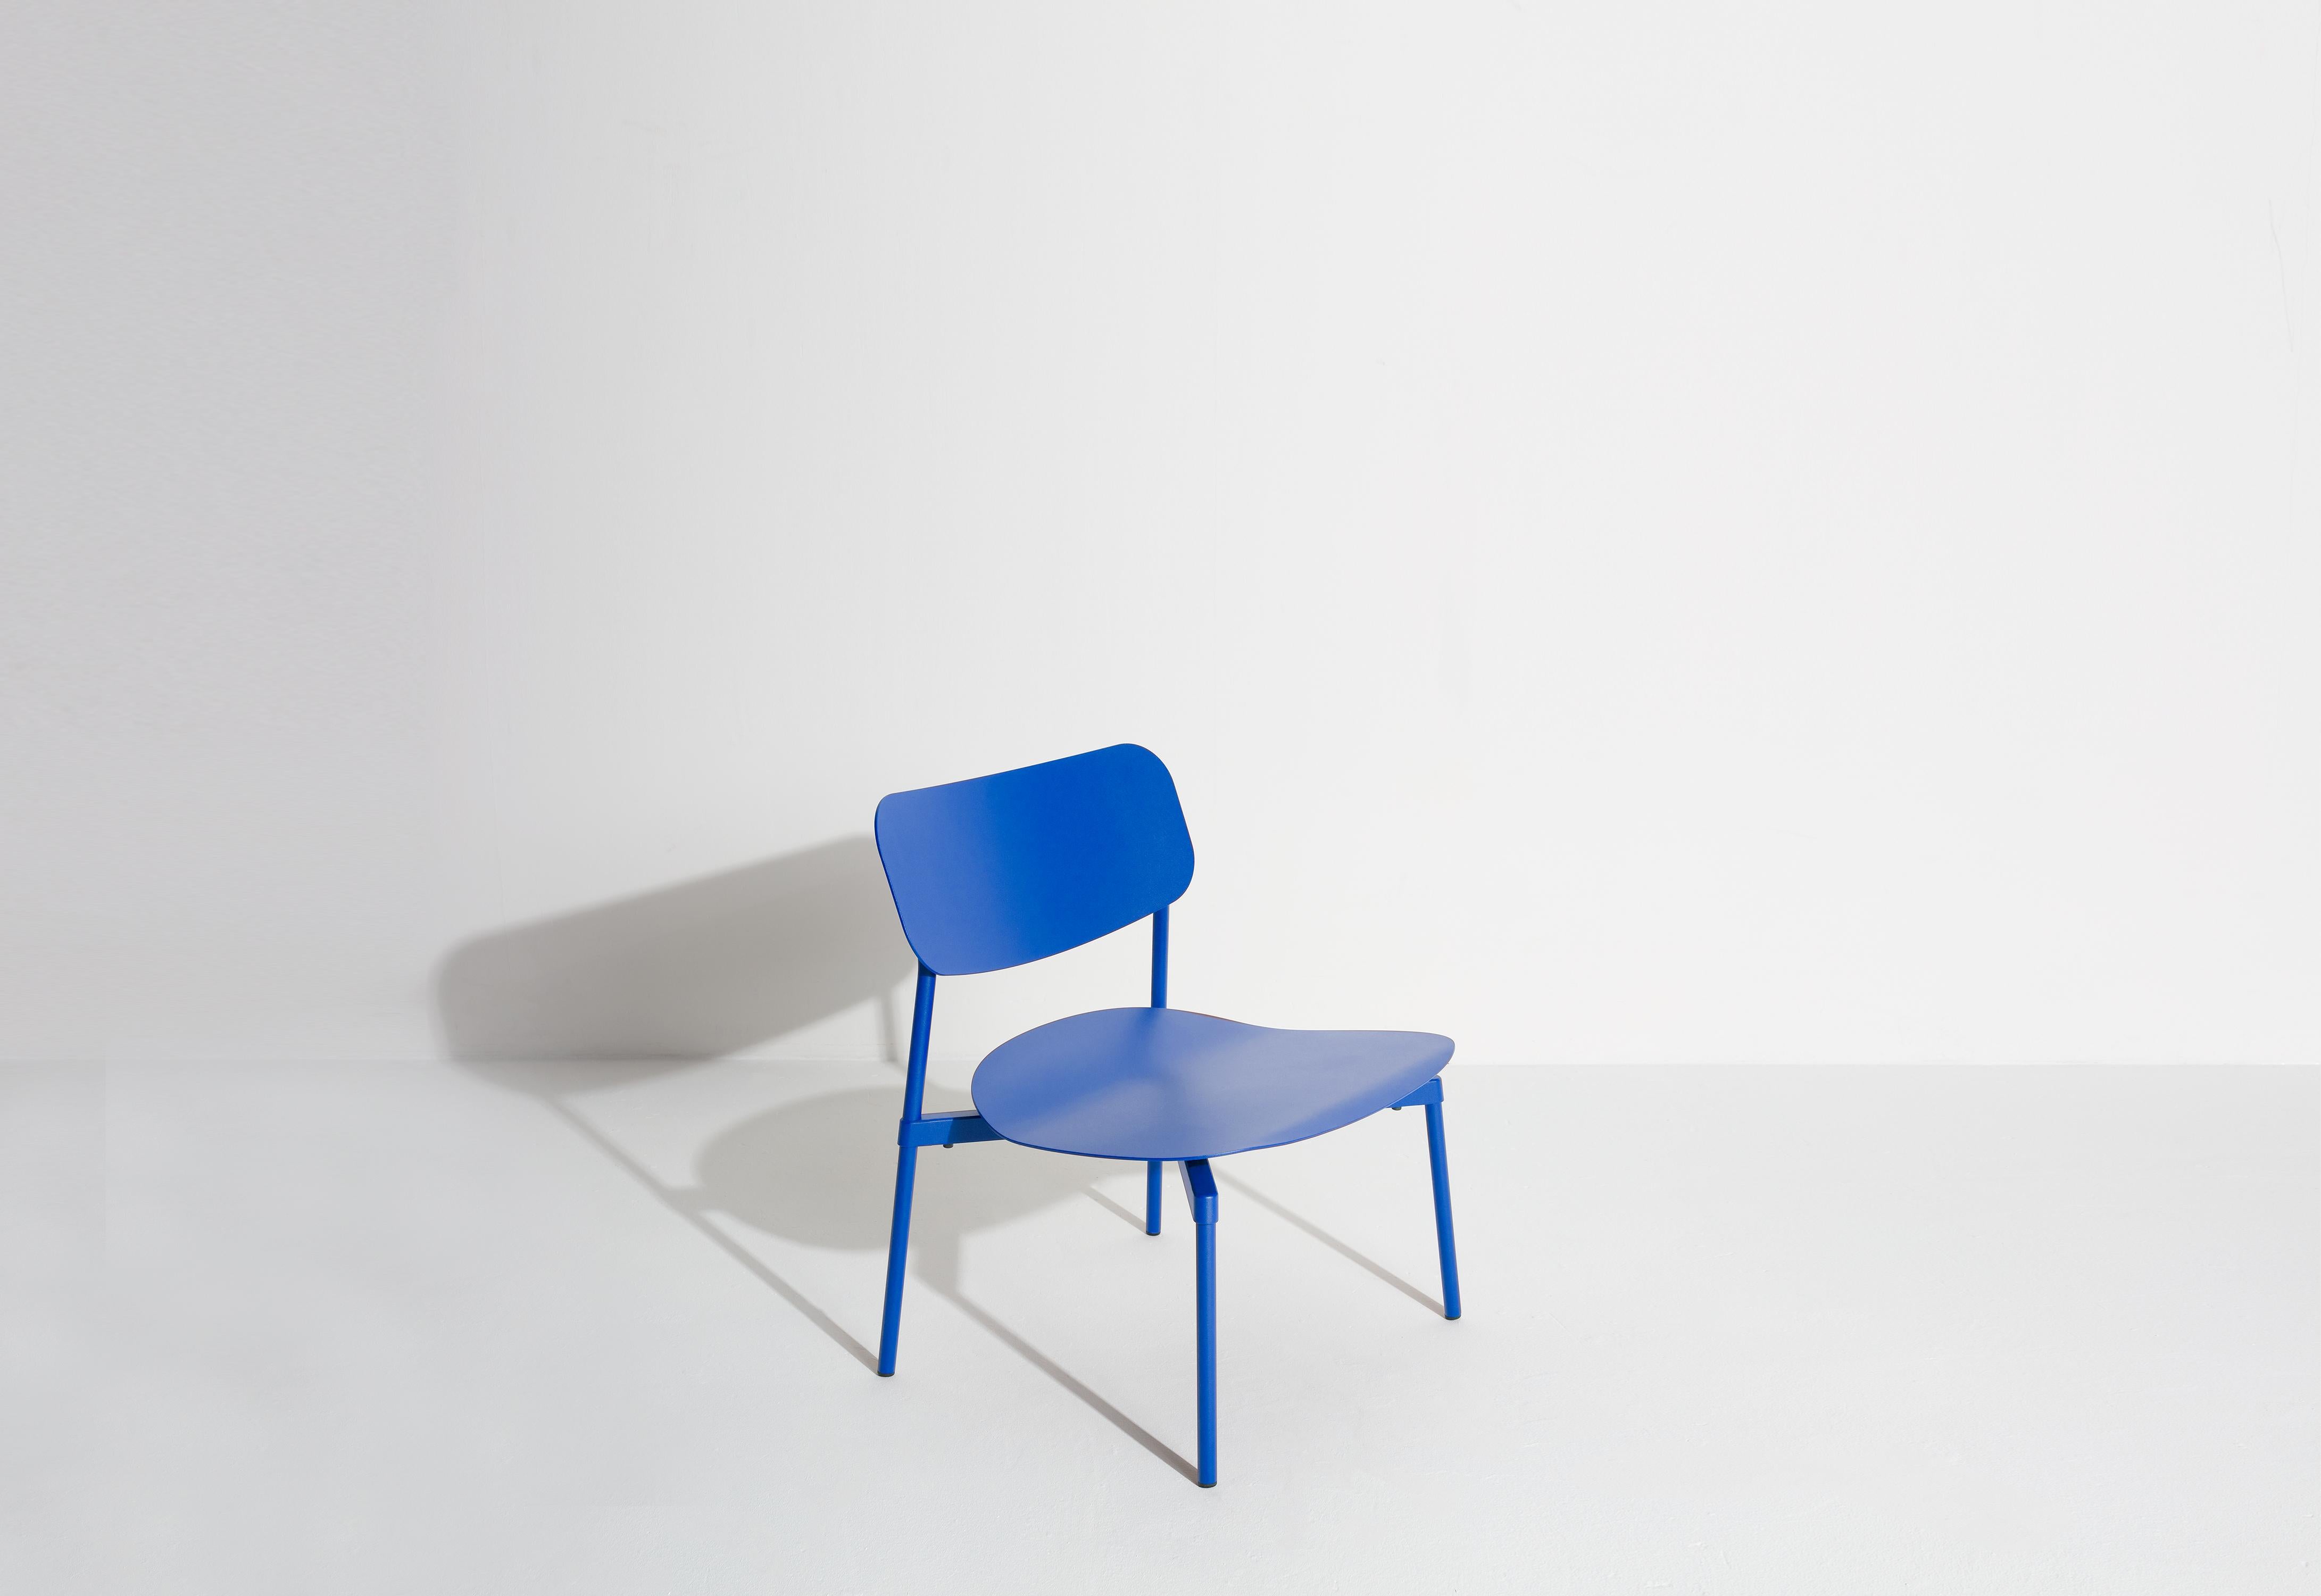 Petite Friture Fromme Lounge Armchair in Blue Aluminium by Tom Chung, 2020

The Fromme collection stands out by its pure line and compact design. Absorbers placed under the seating gives a soft and very comfortable flexibility to seats. Made from